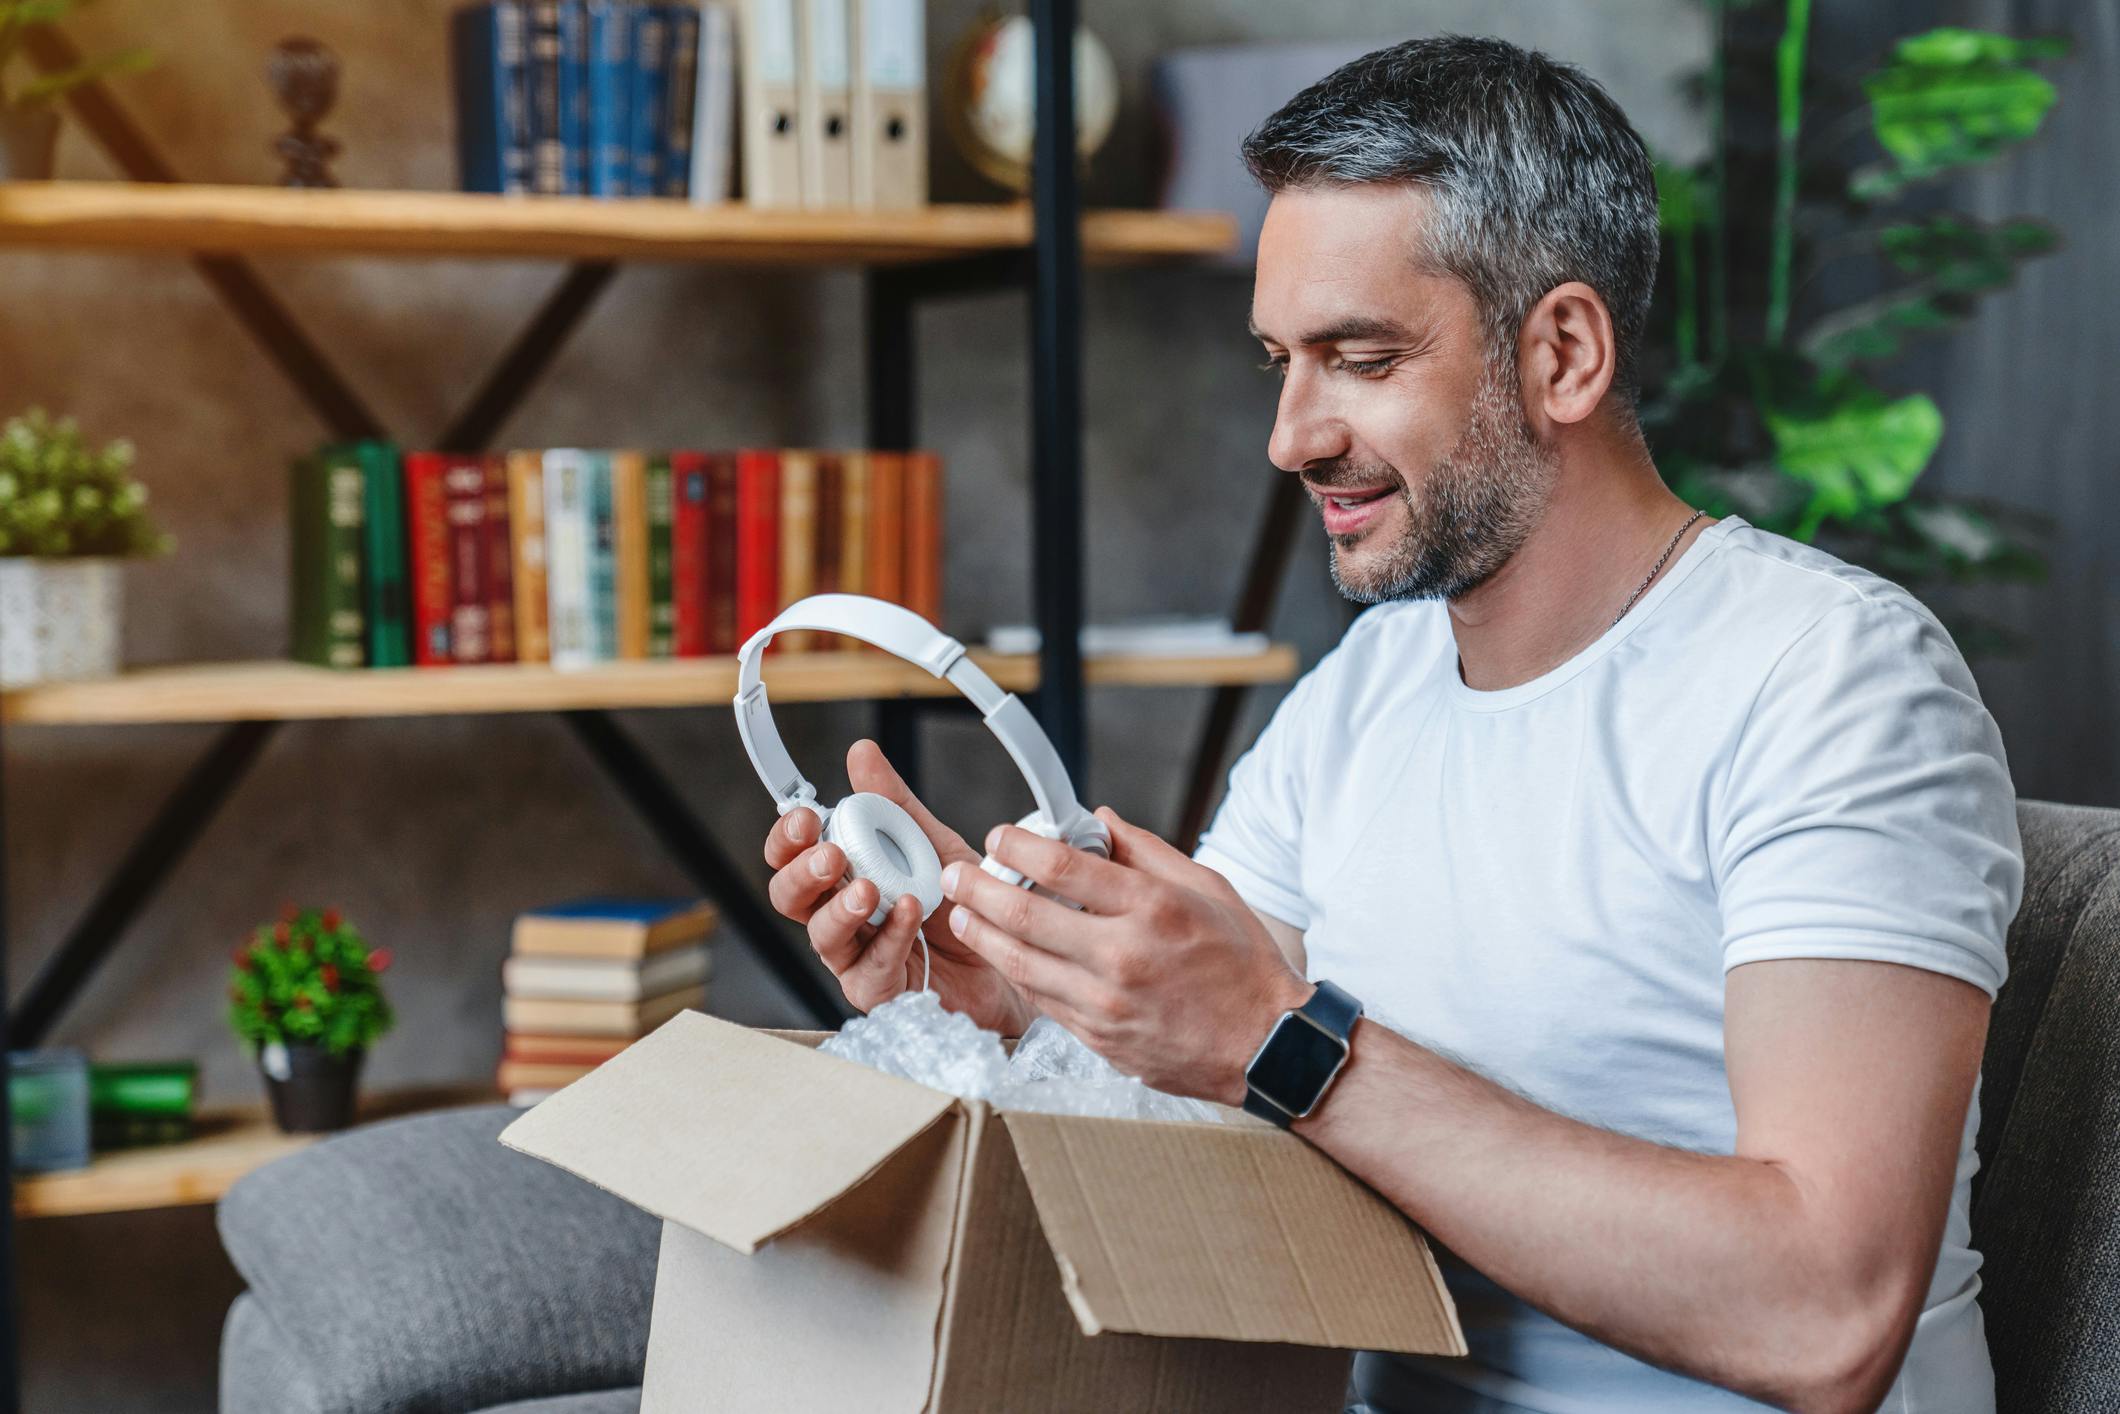 Next to a bookshelf, a man is opening a gift containing headphones.